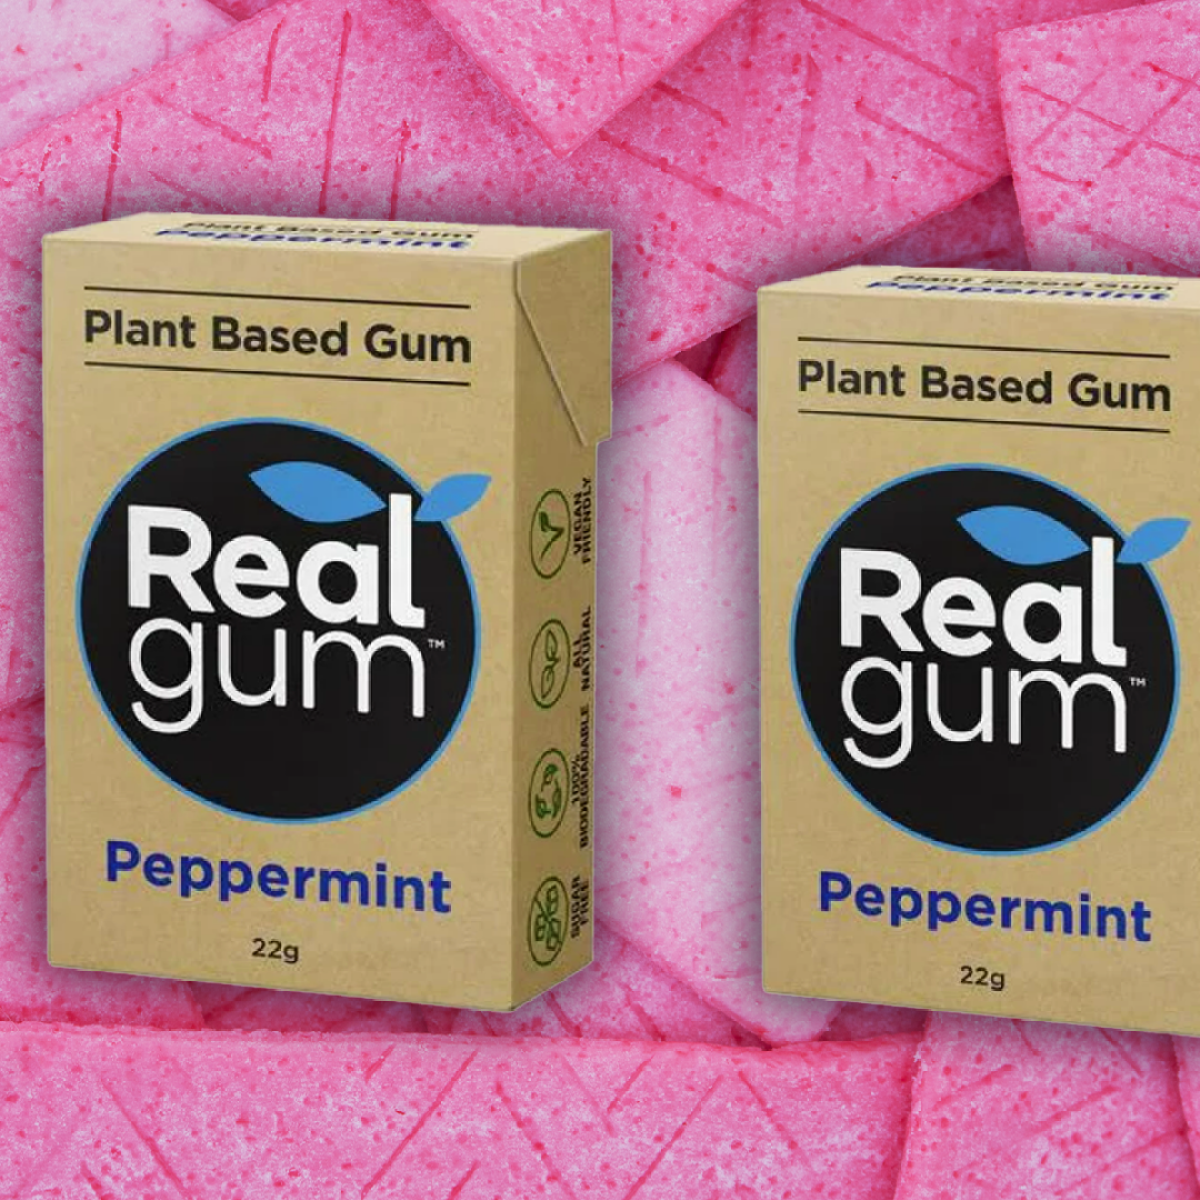 Should plastic gum base be replaced with a plant-based alternative? - New  Food Magazine